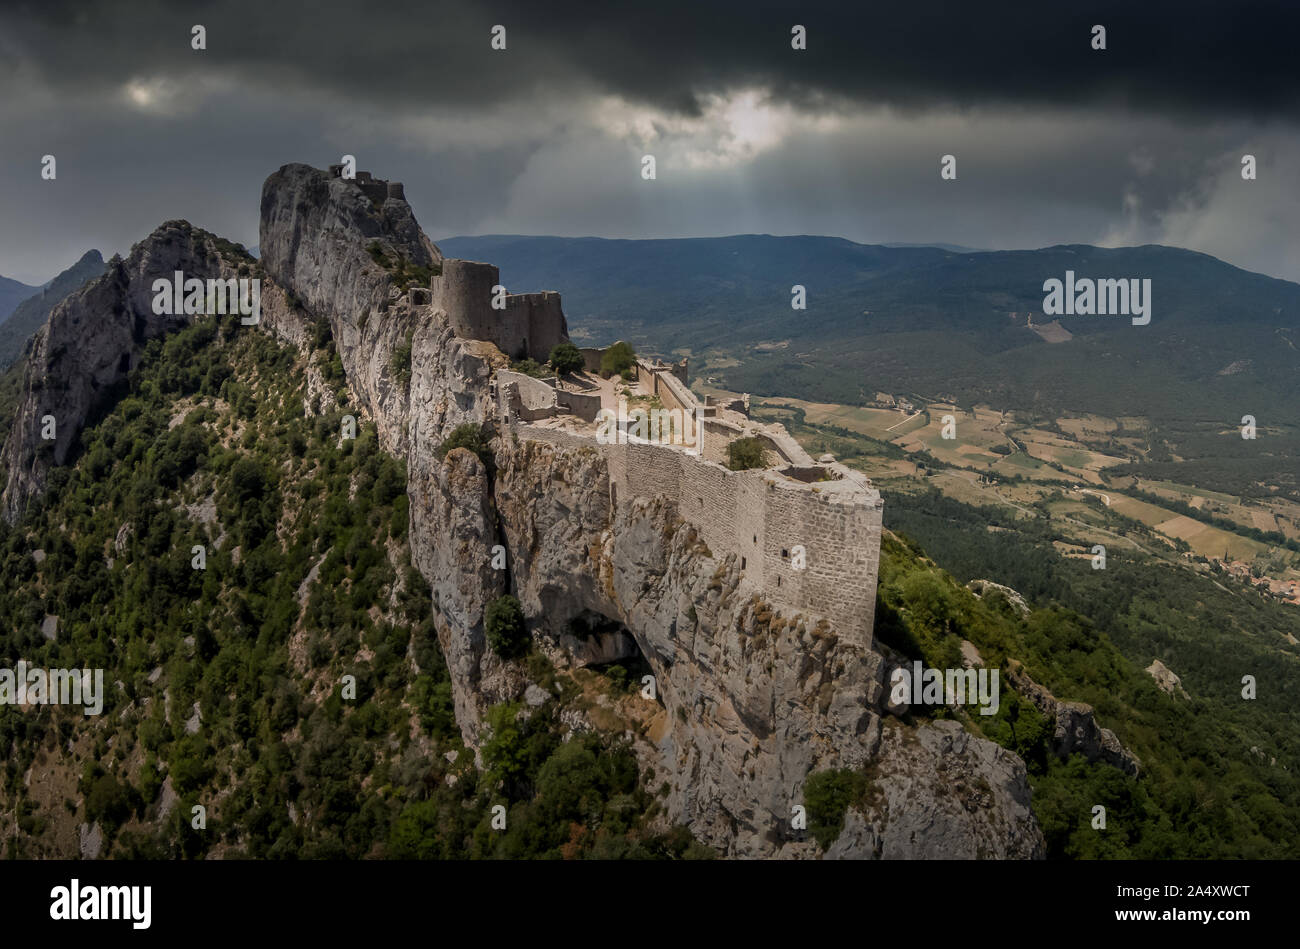 Aerial view of Peyrepertuse castle in France with dramatic sky Stock Photo